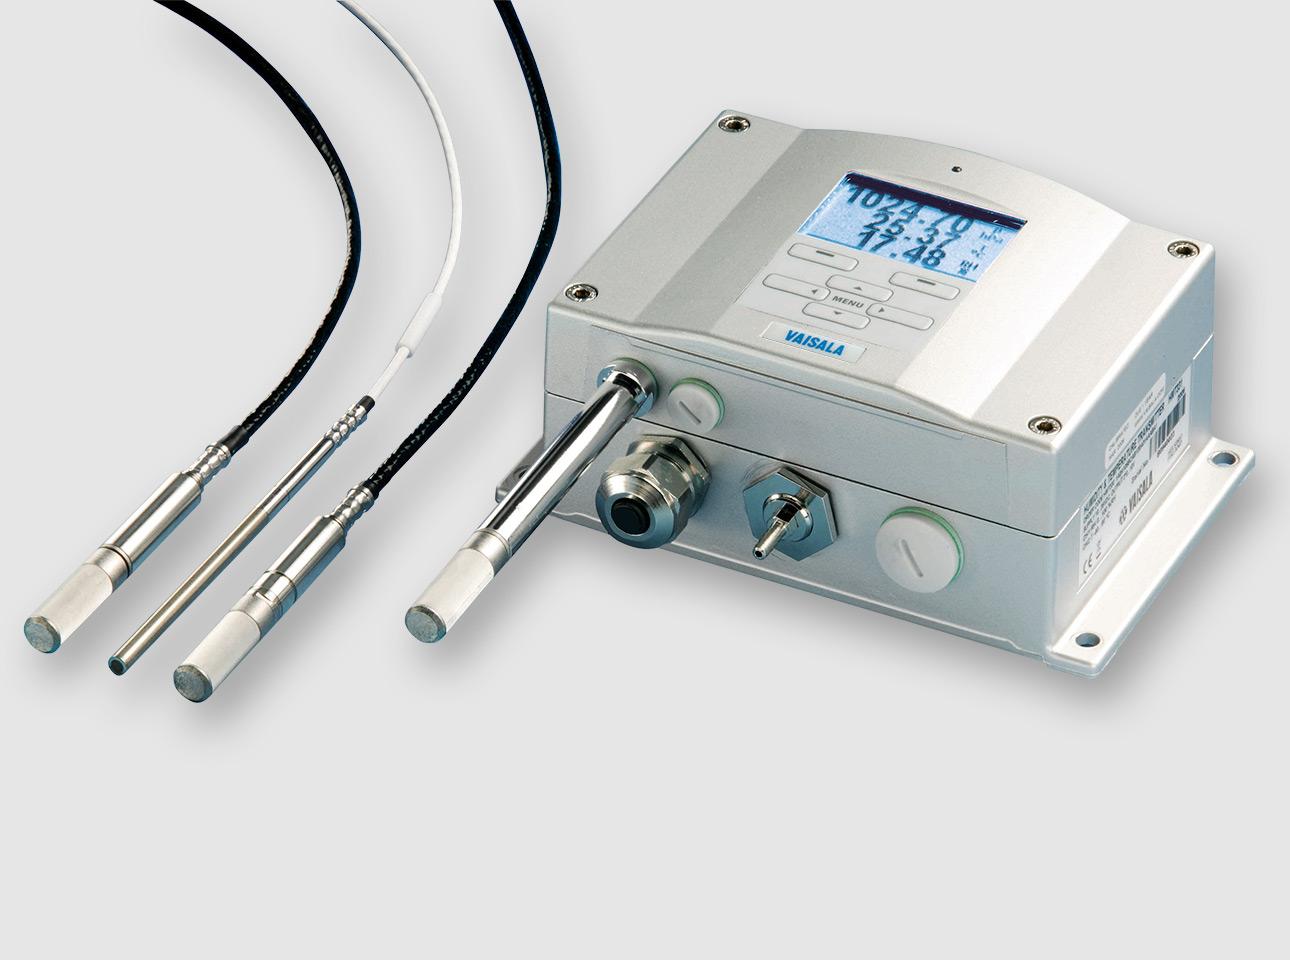 PTU300 Combined Pressure, Humidity and Temperature Transmitter